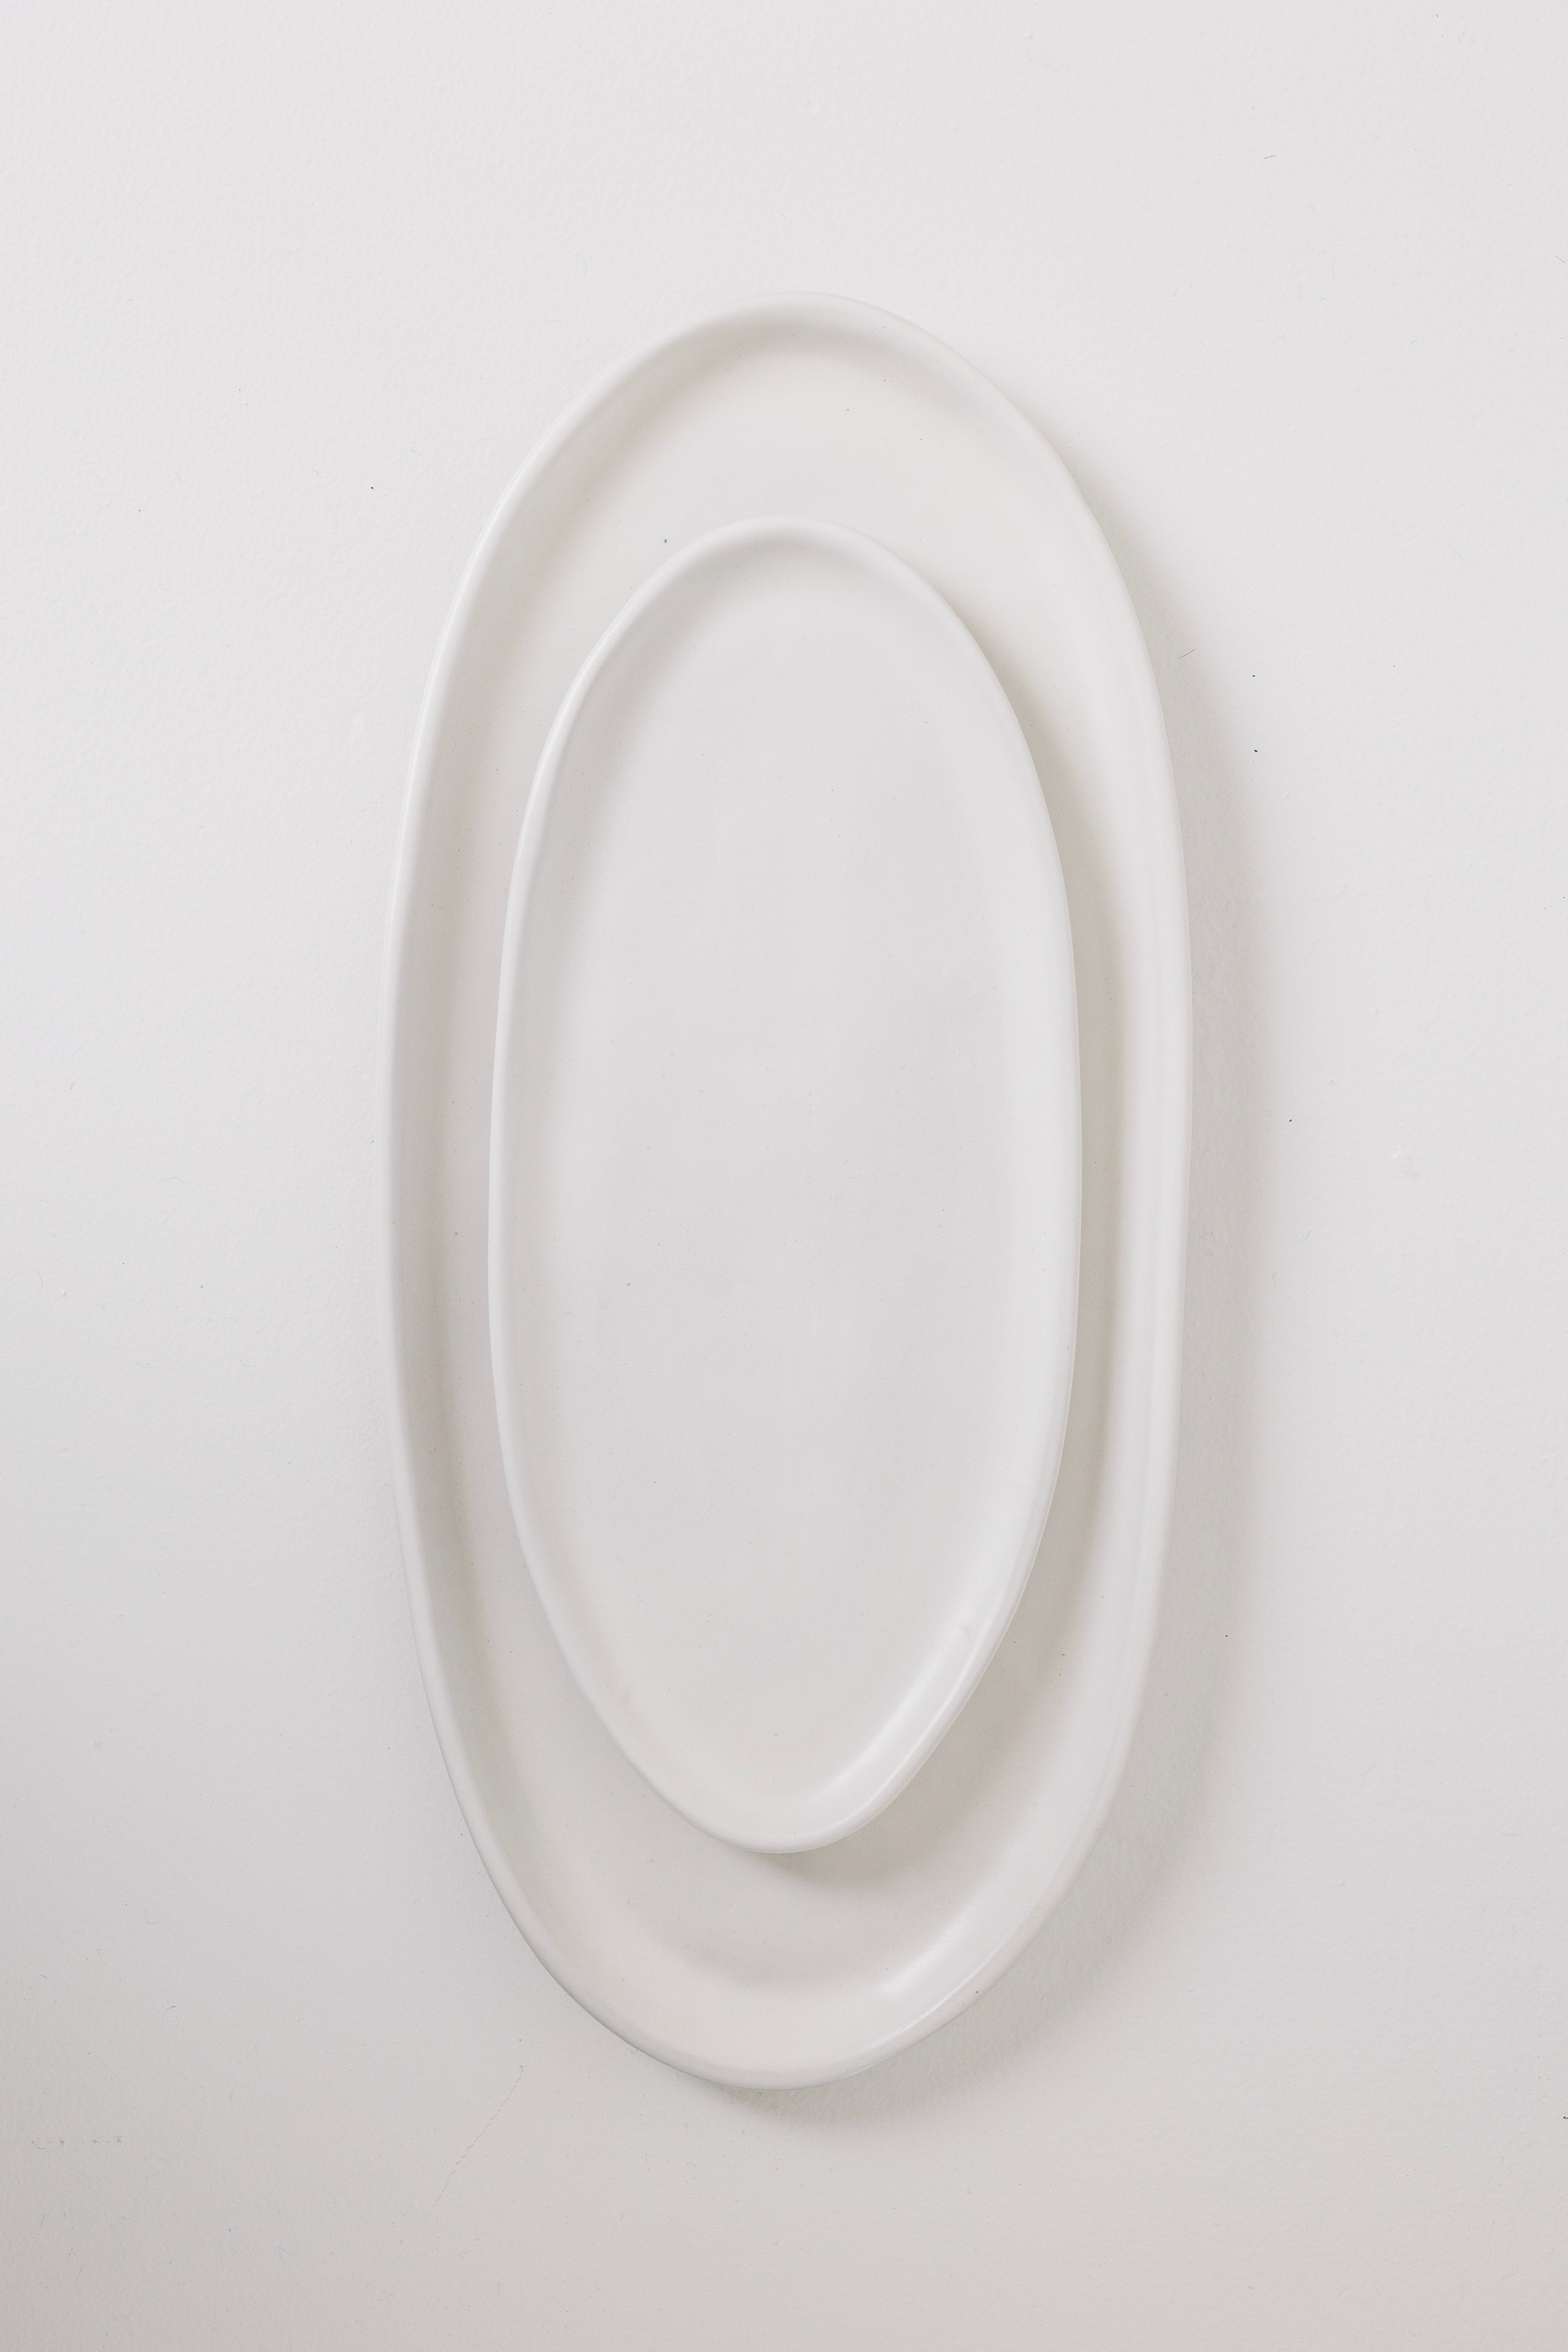 Ines Small Oval Lipped Serving Plate - Matte White - 12 inch